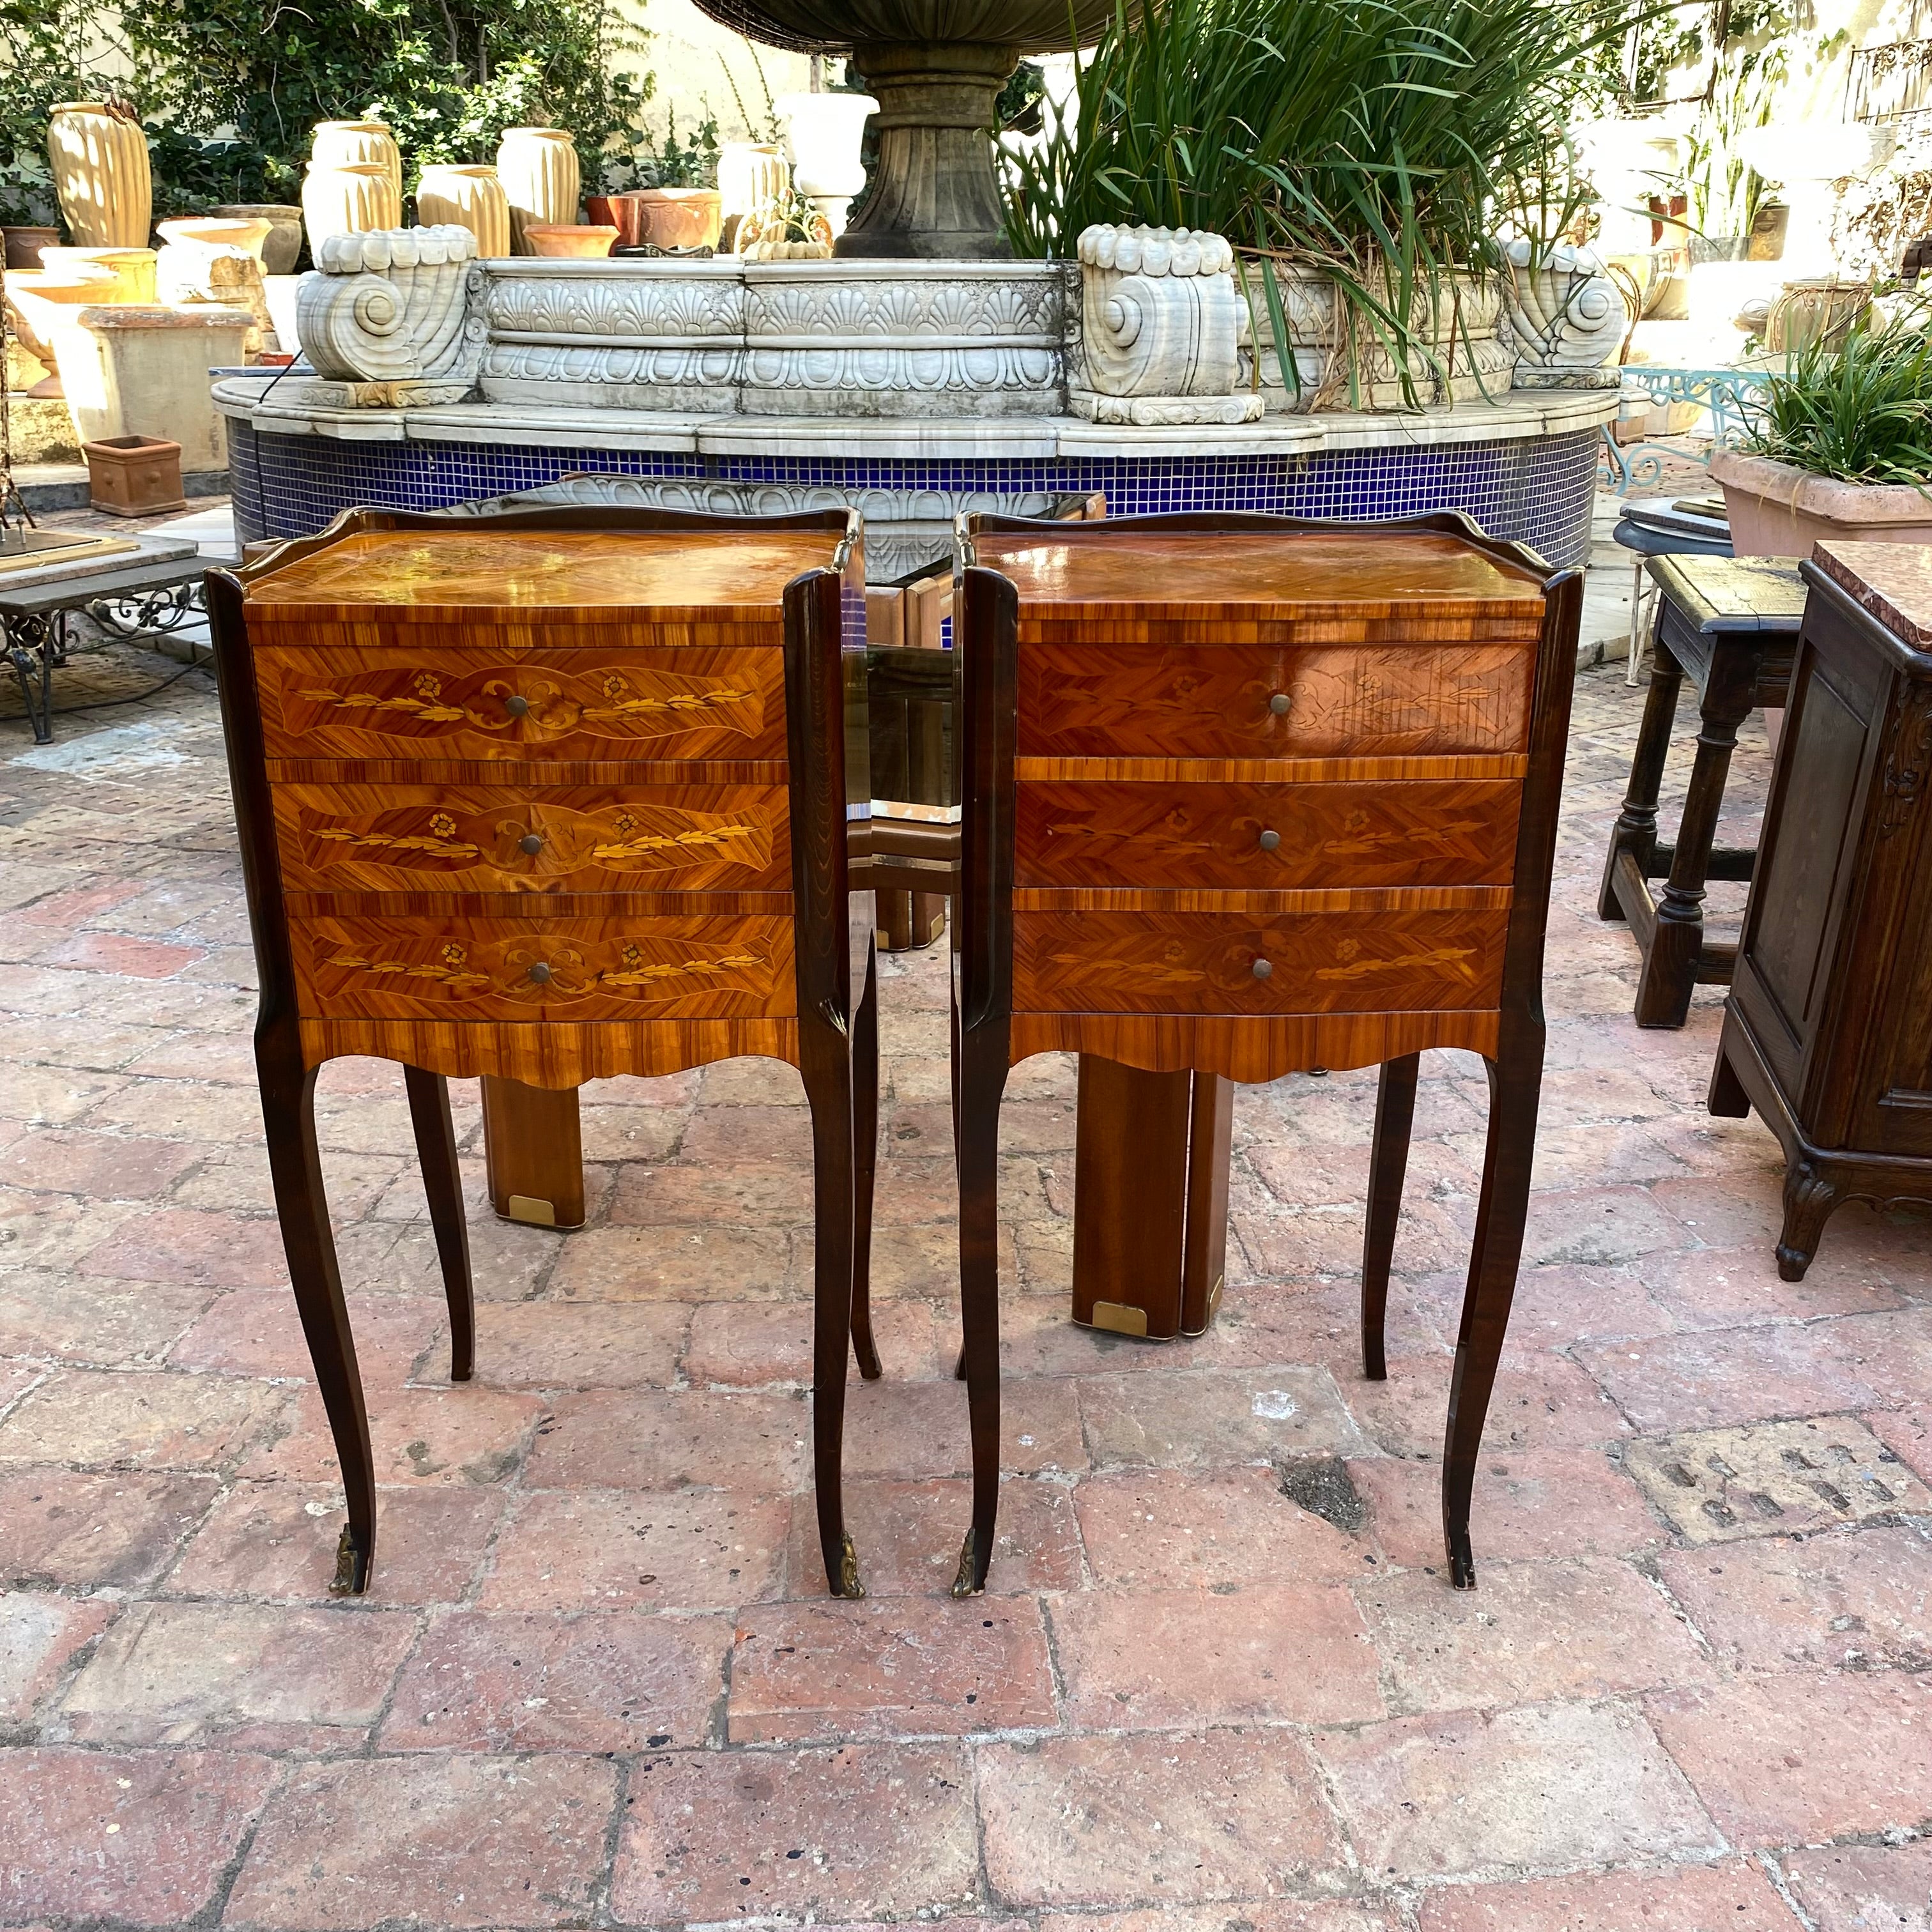 Antique French Pedestals with Beautiful Inlay and Brass Feet